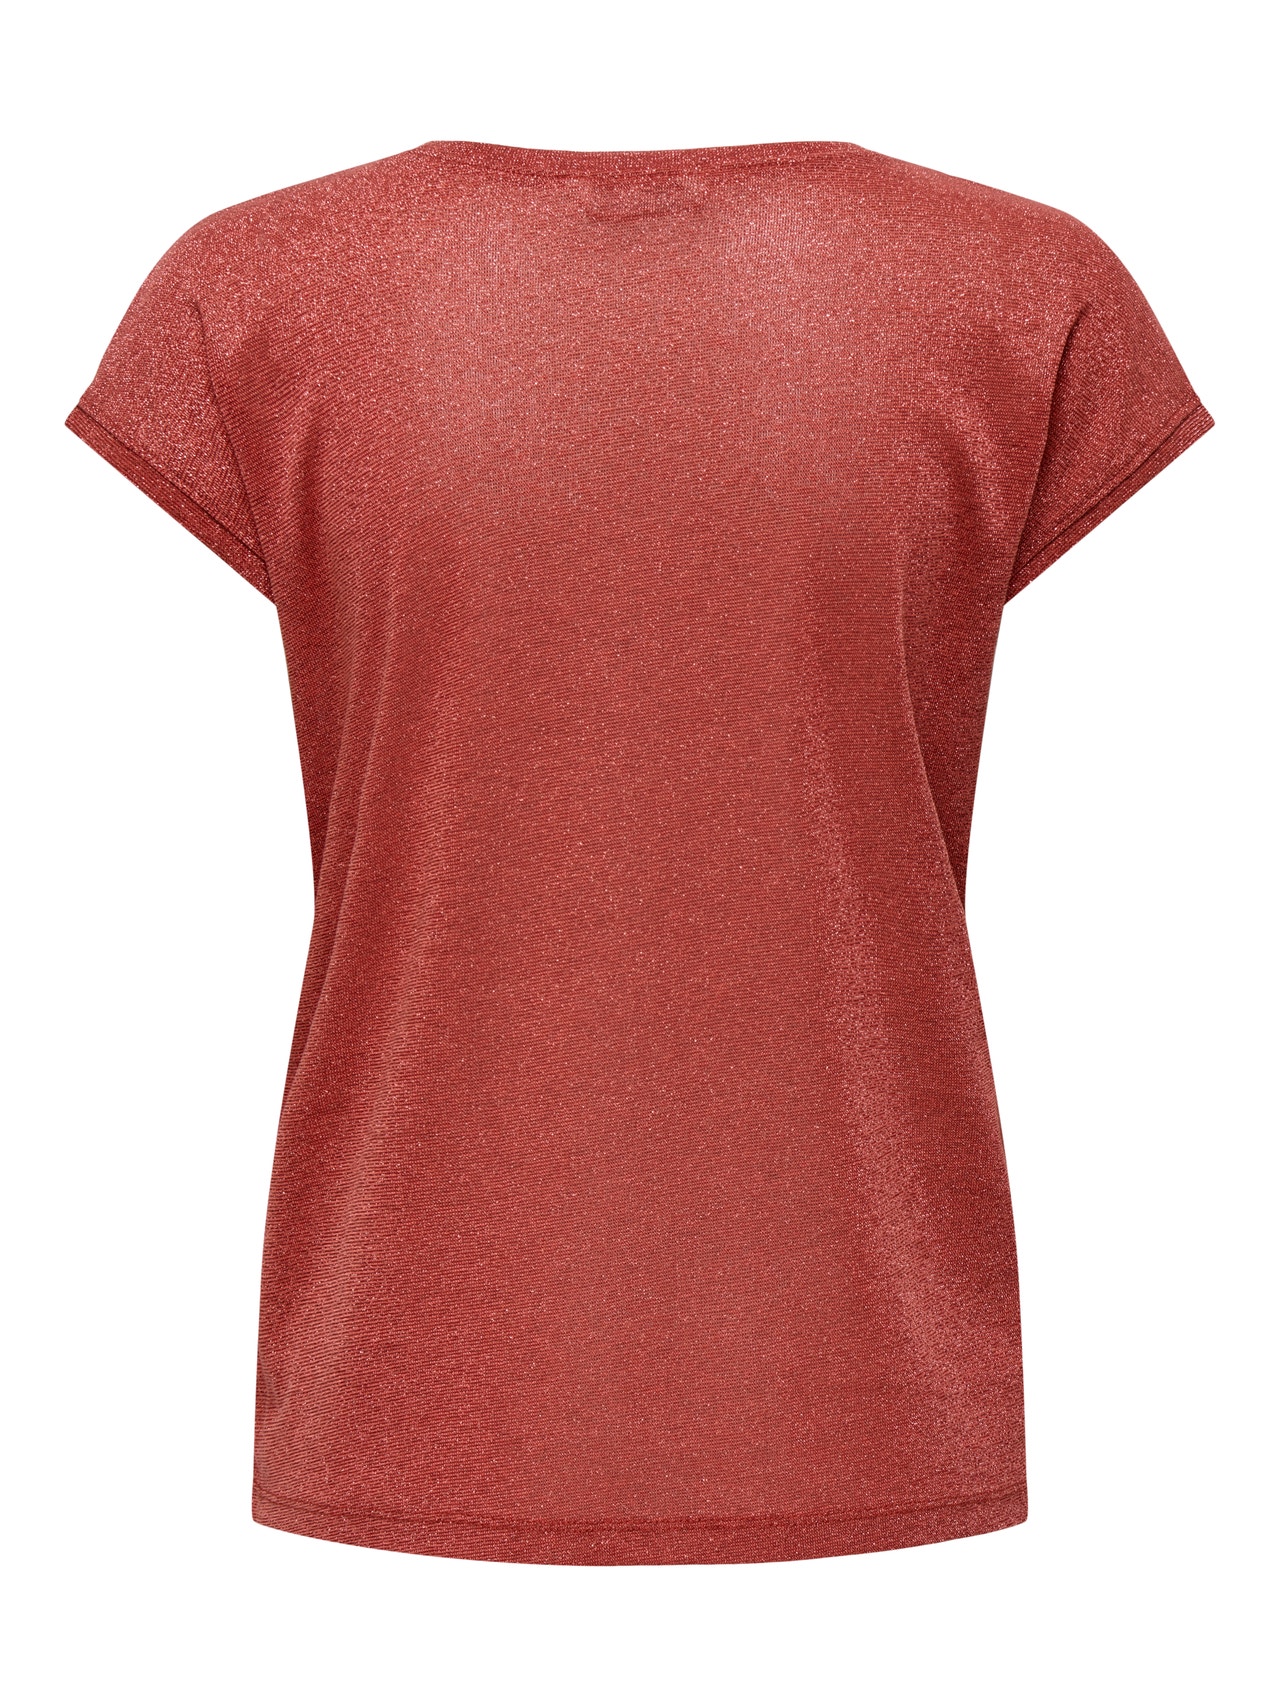 ONLY Loose Short Sleeved Top -Cayenne - 15136069